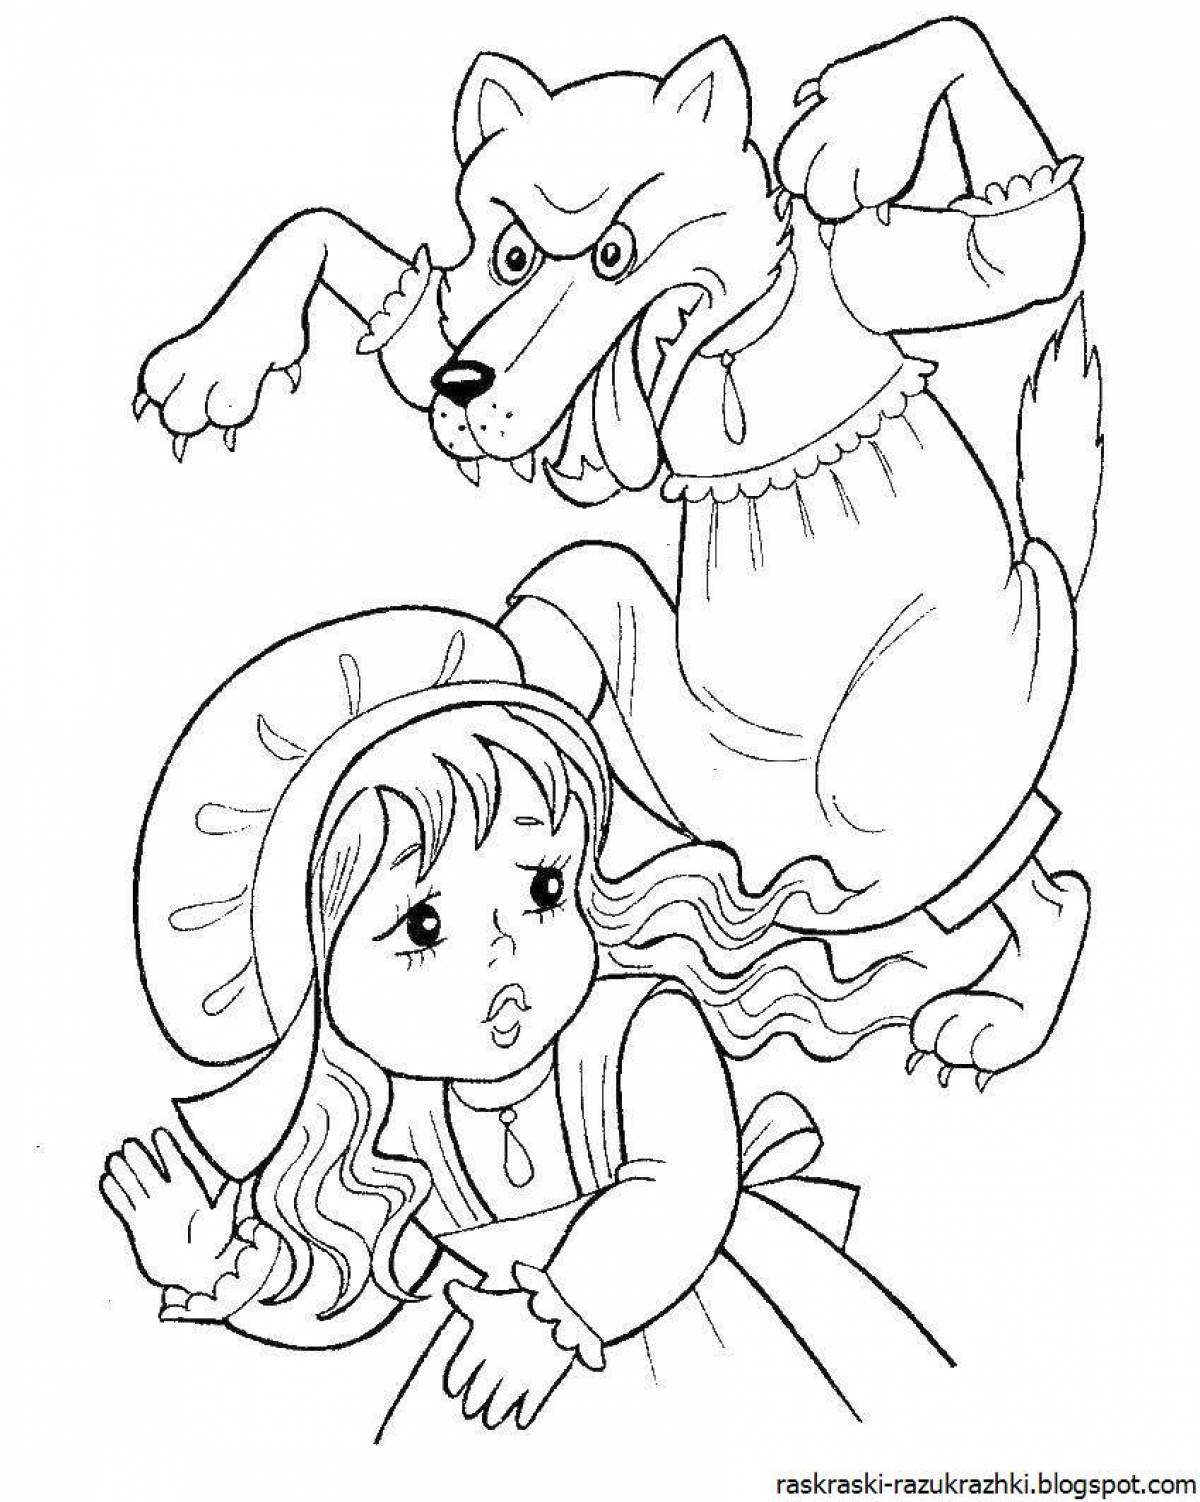 Adorable little red riding hood coloring book